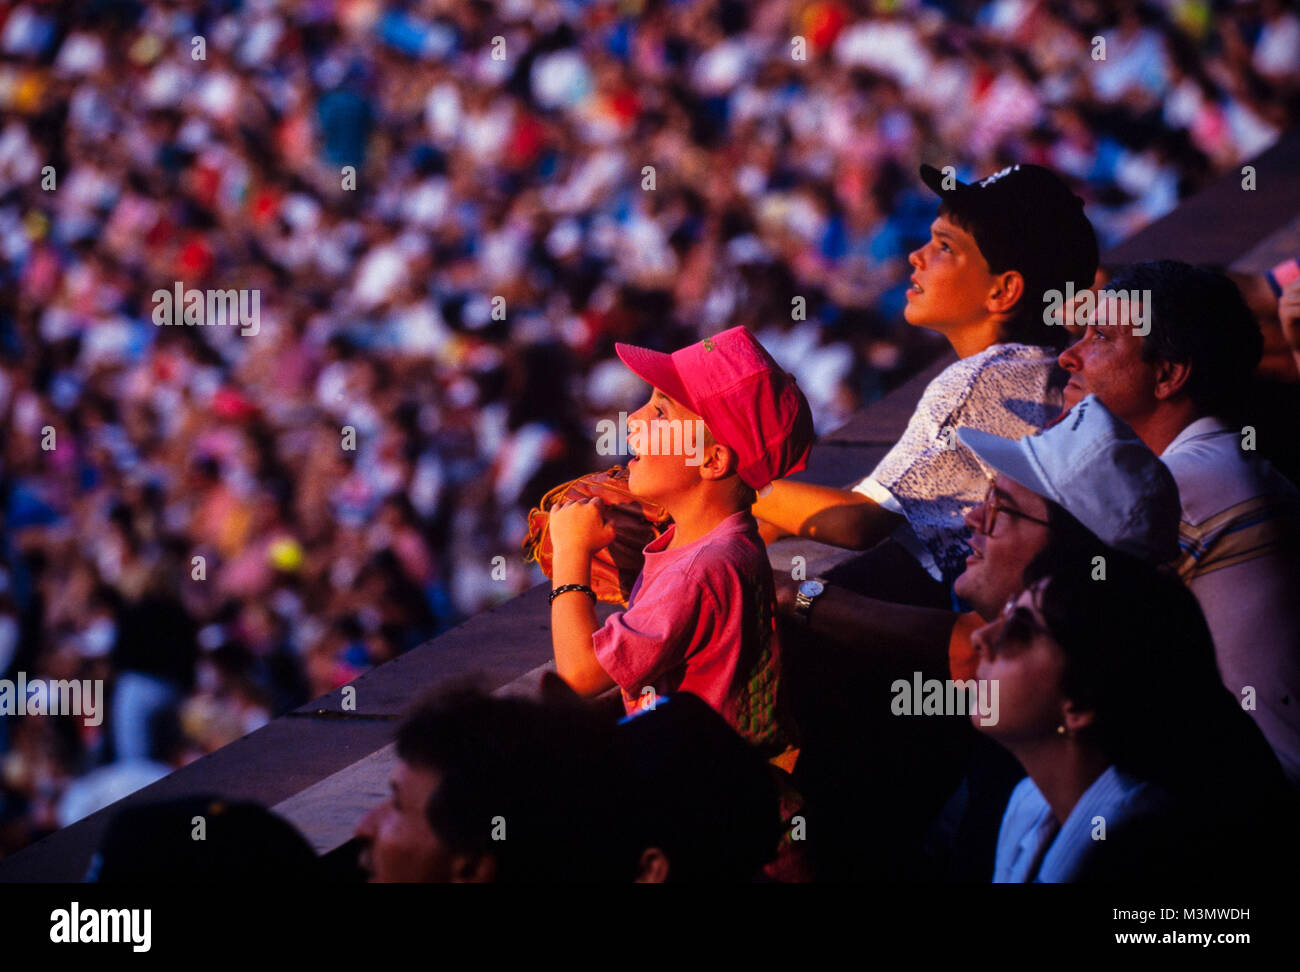 A spot of late afternoon sunlight hits a boy hoping to catch a fly ball in a baseball park Stock Photo